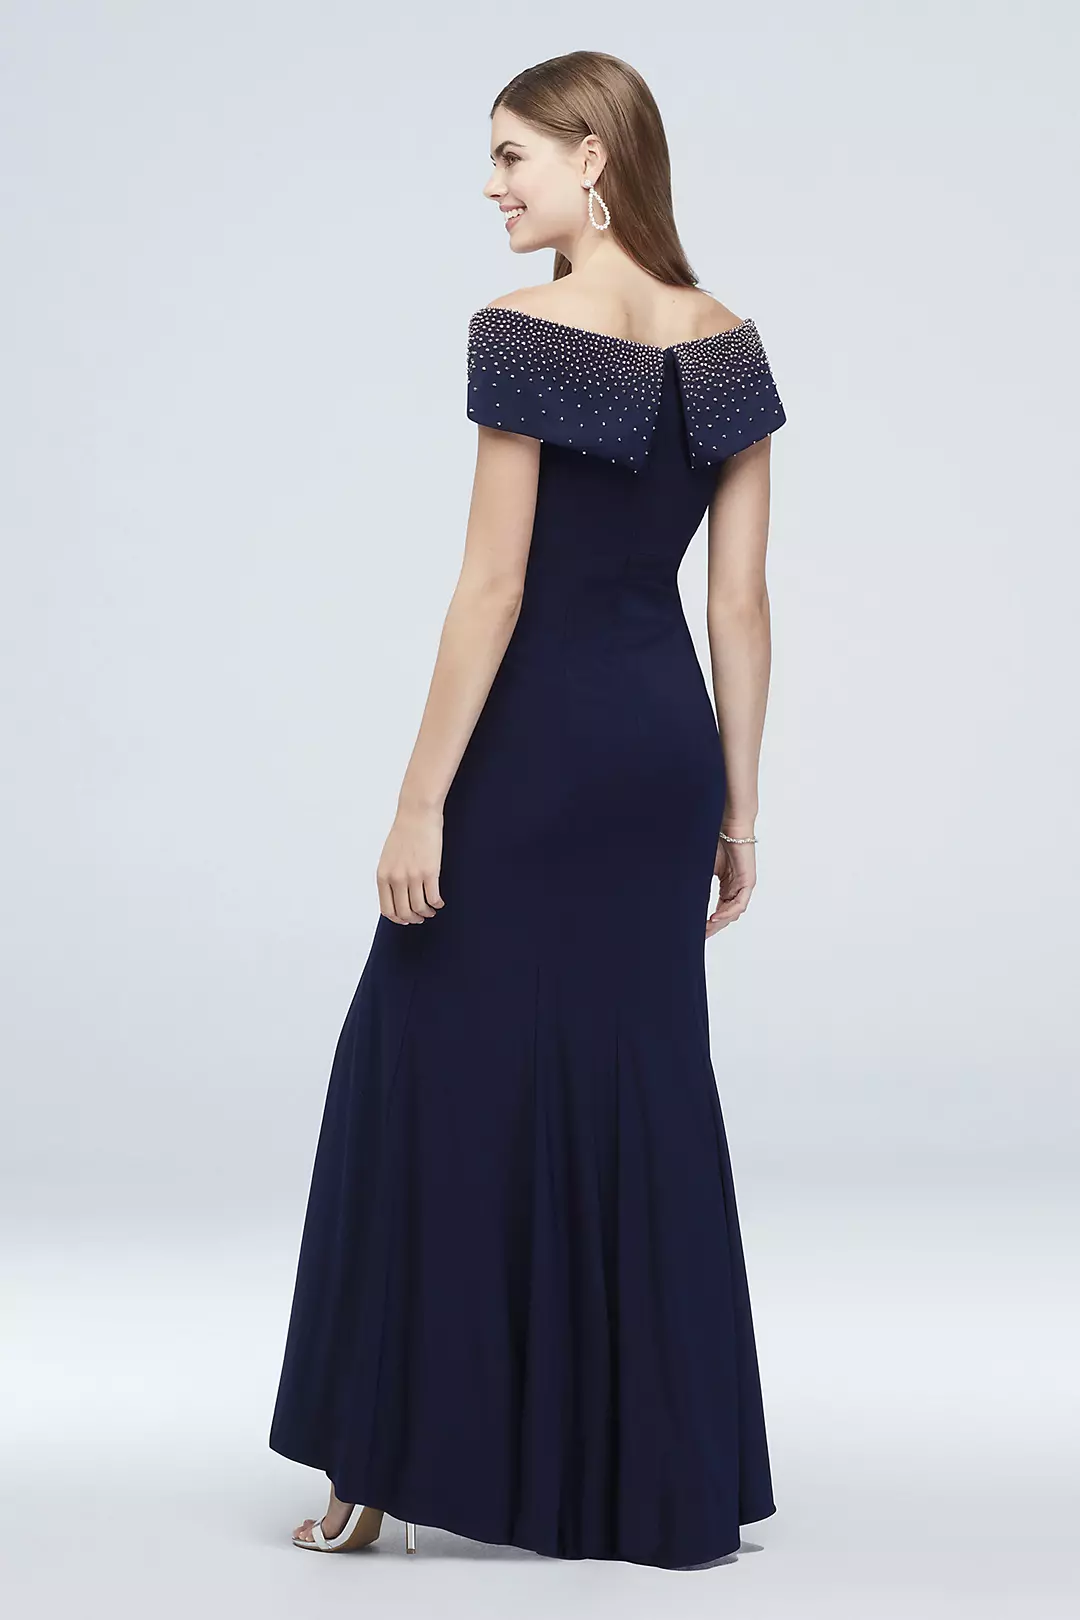 Beaded Jersey Off-the-Shoulder Dress with Lapel Image 2